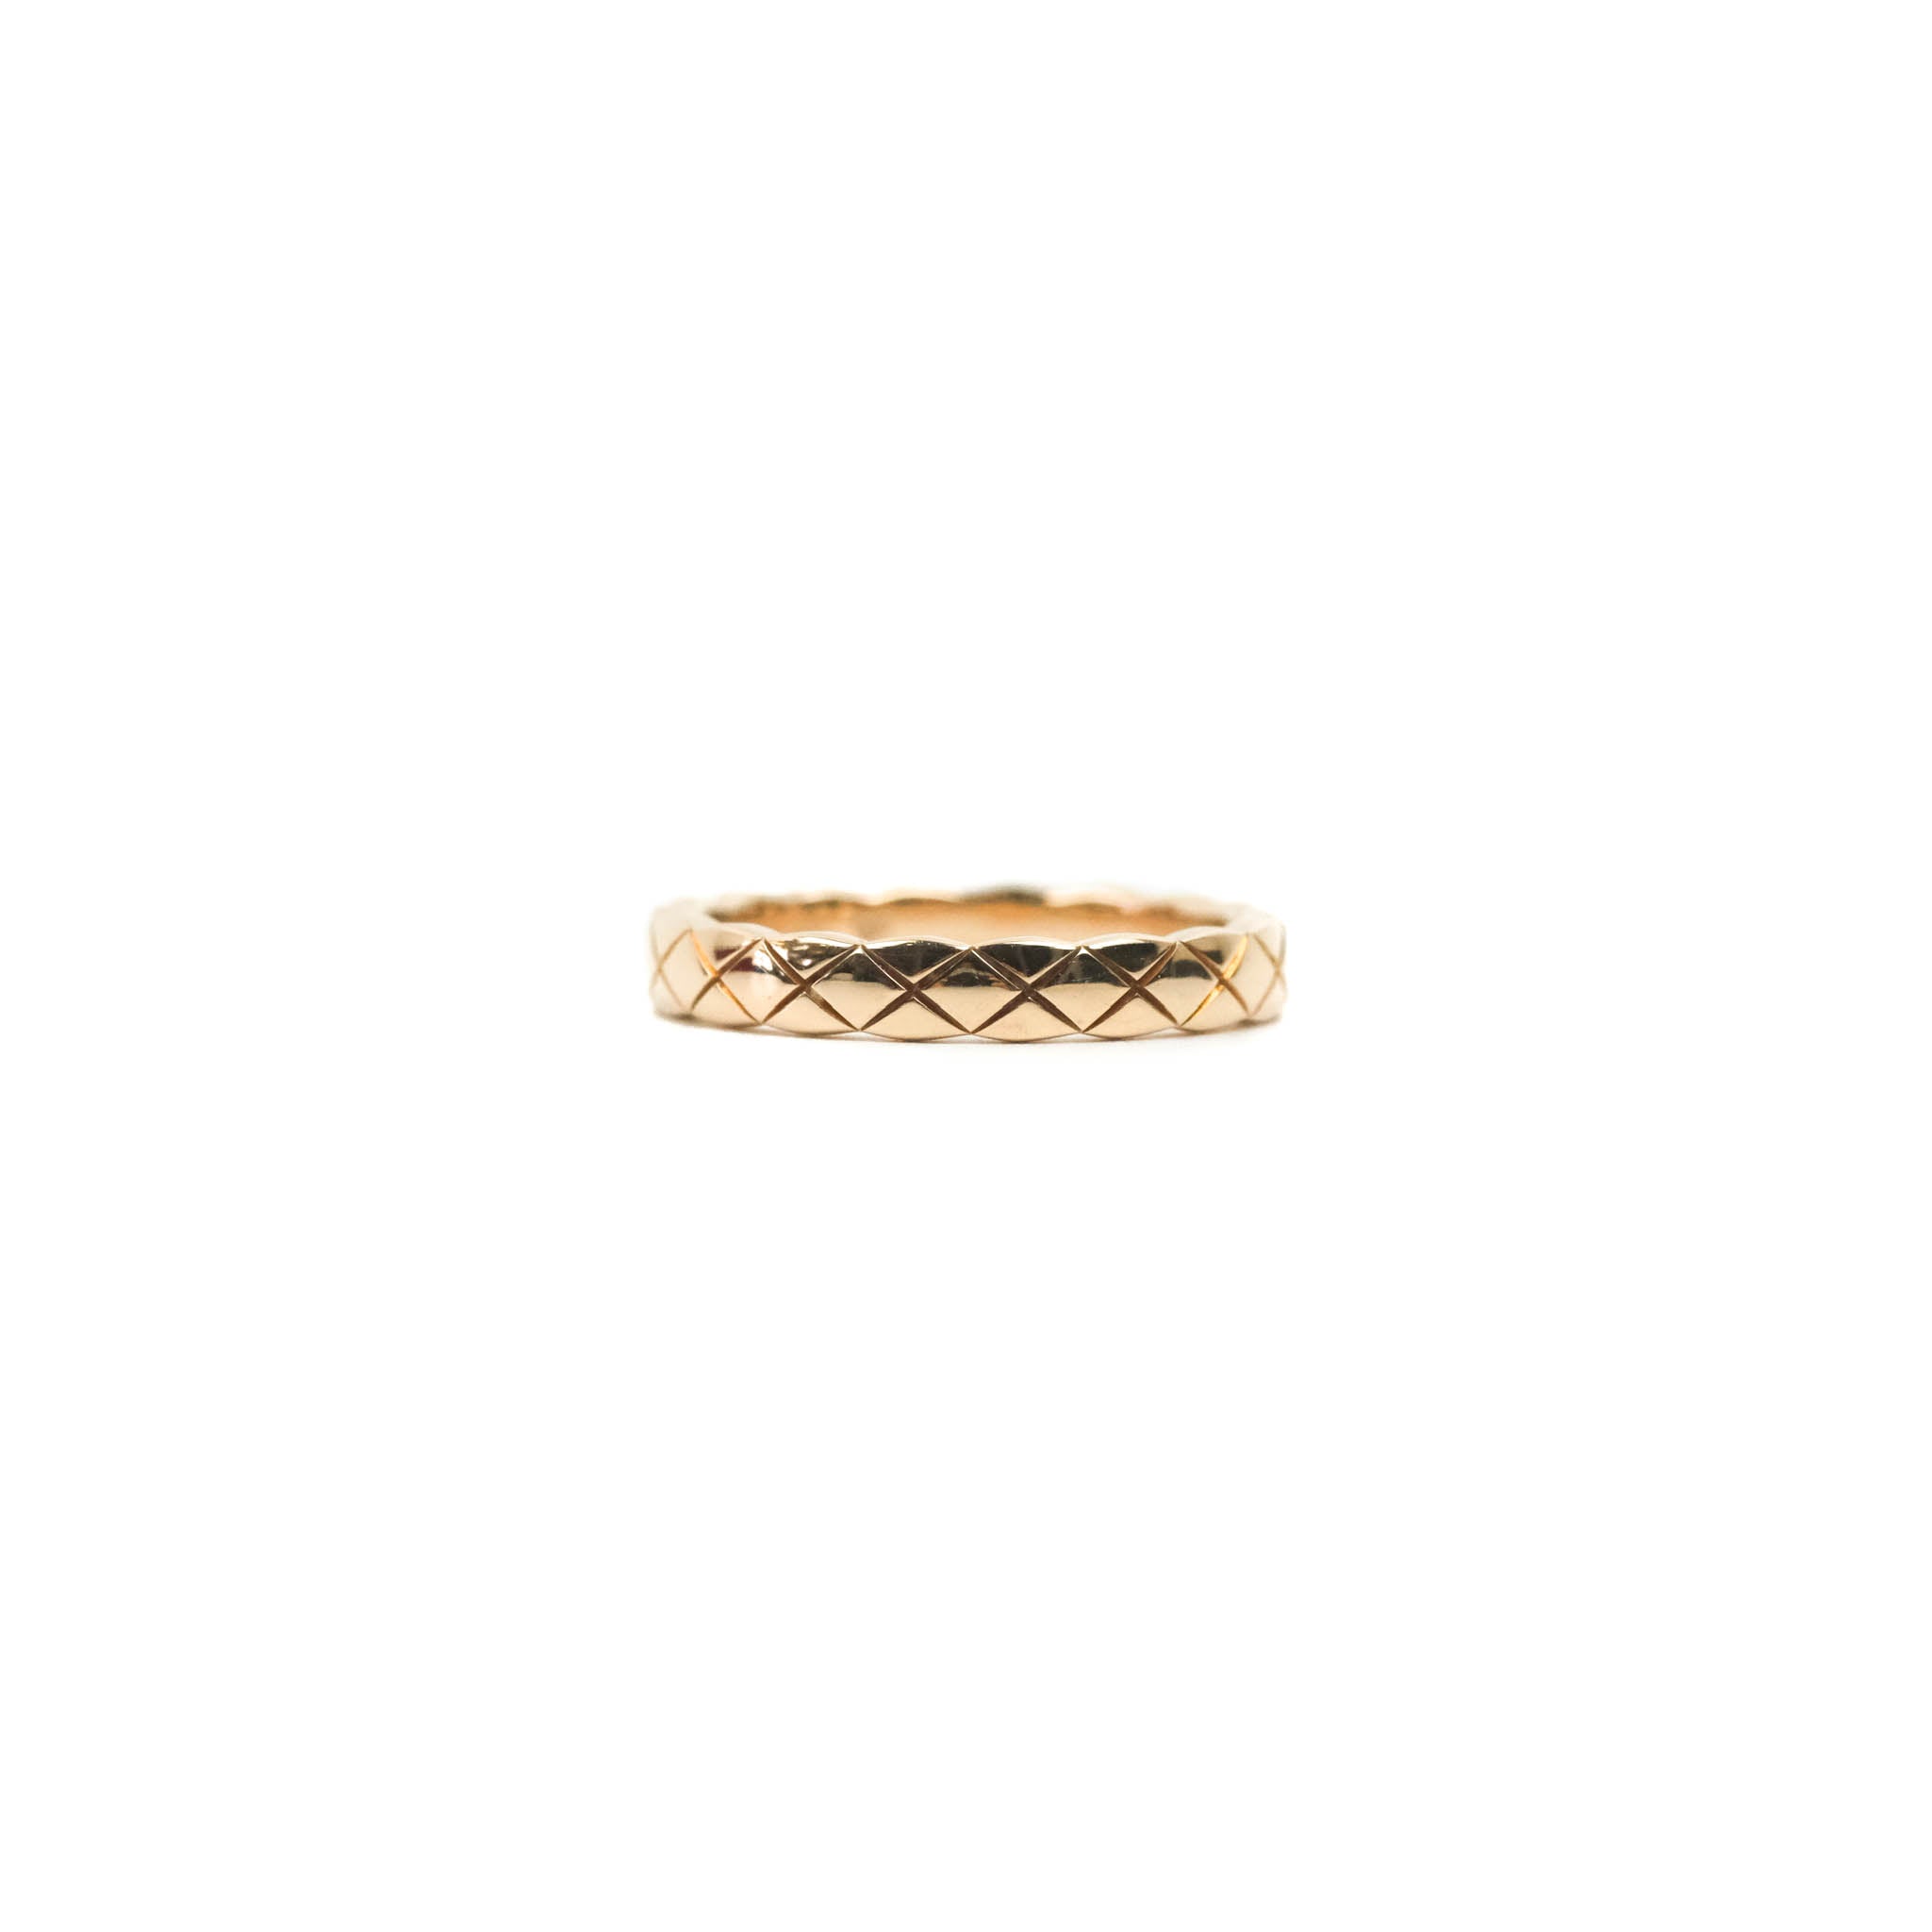 Chanel Coco Crush Ring 18K Beige Gold Size 52 – Coco Approved Studio